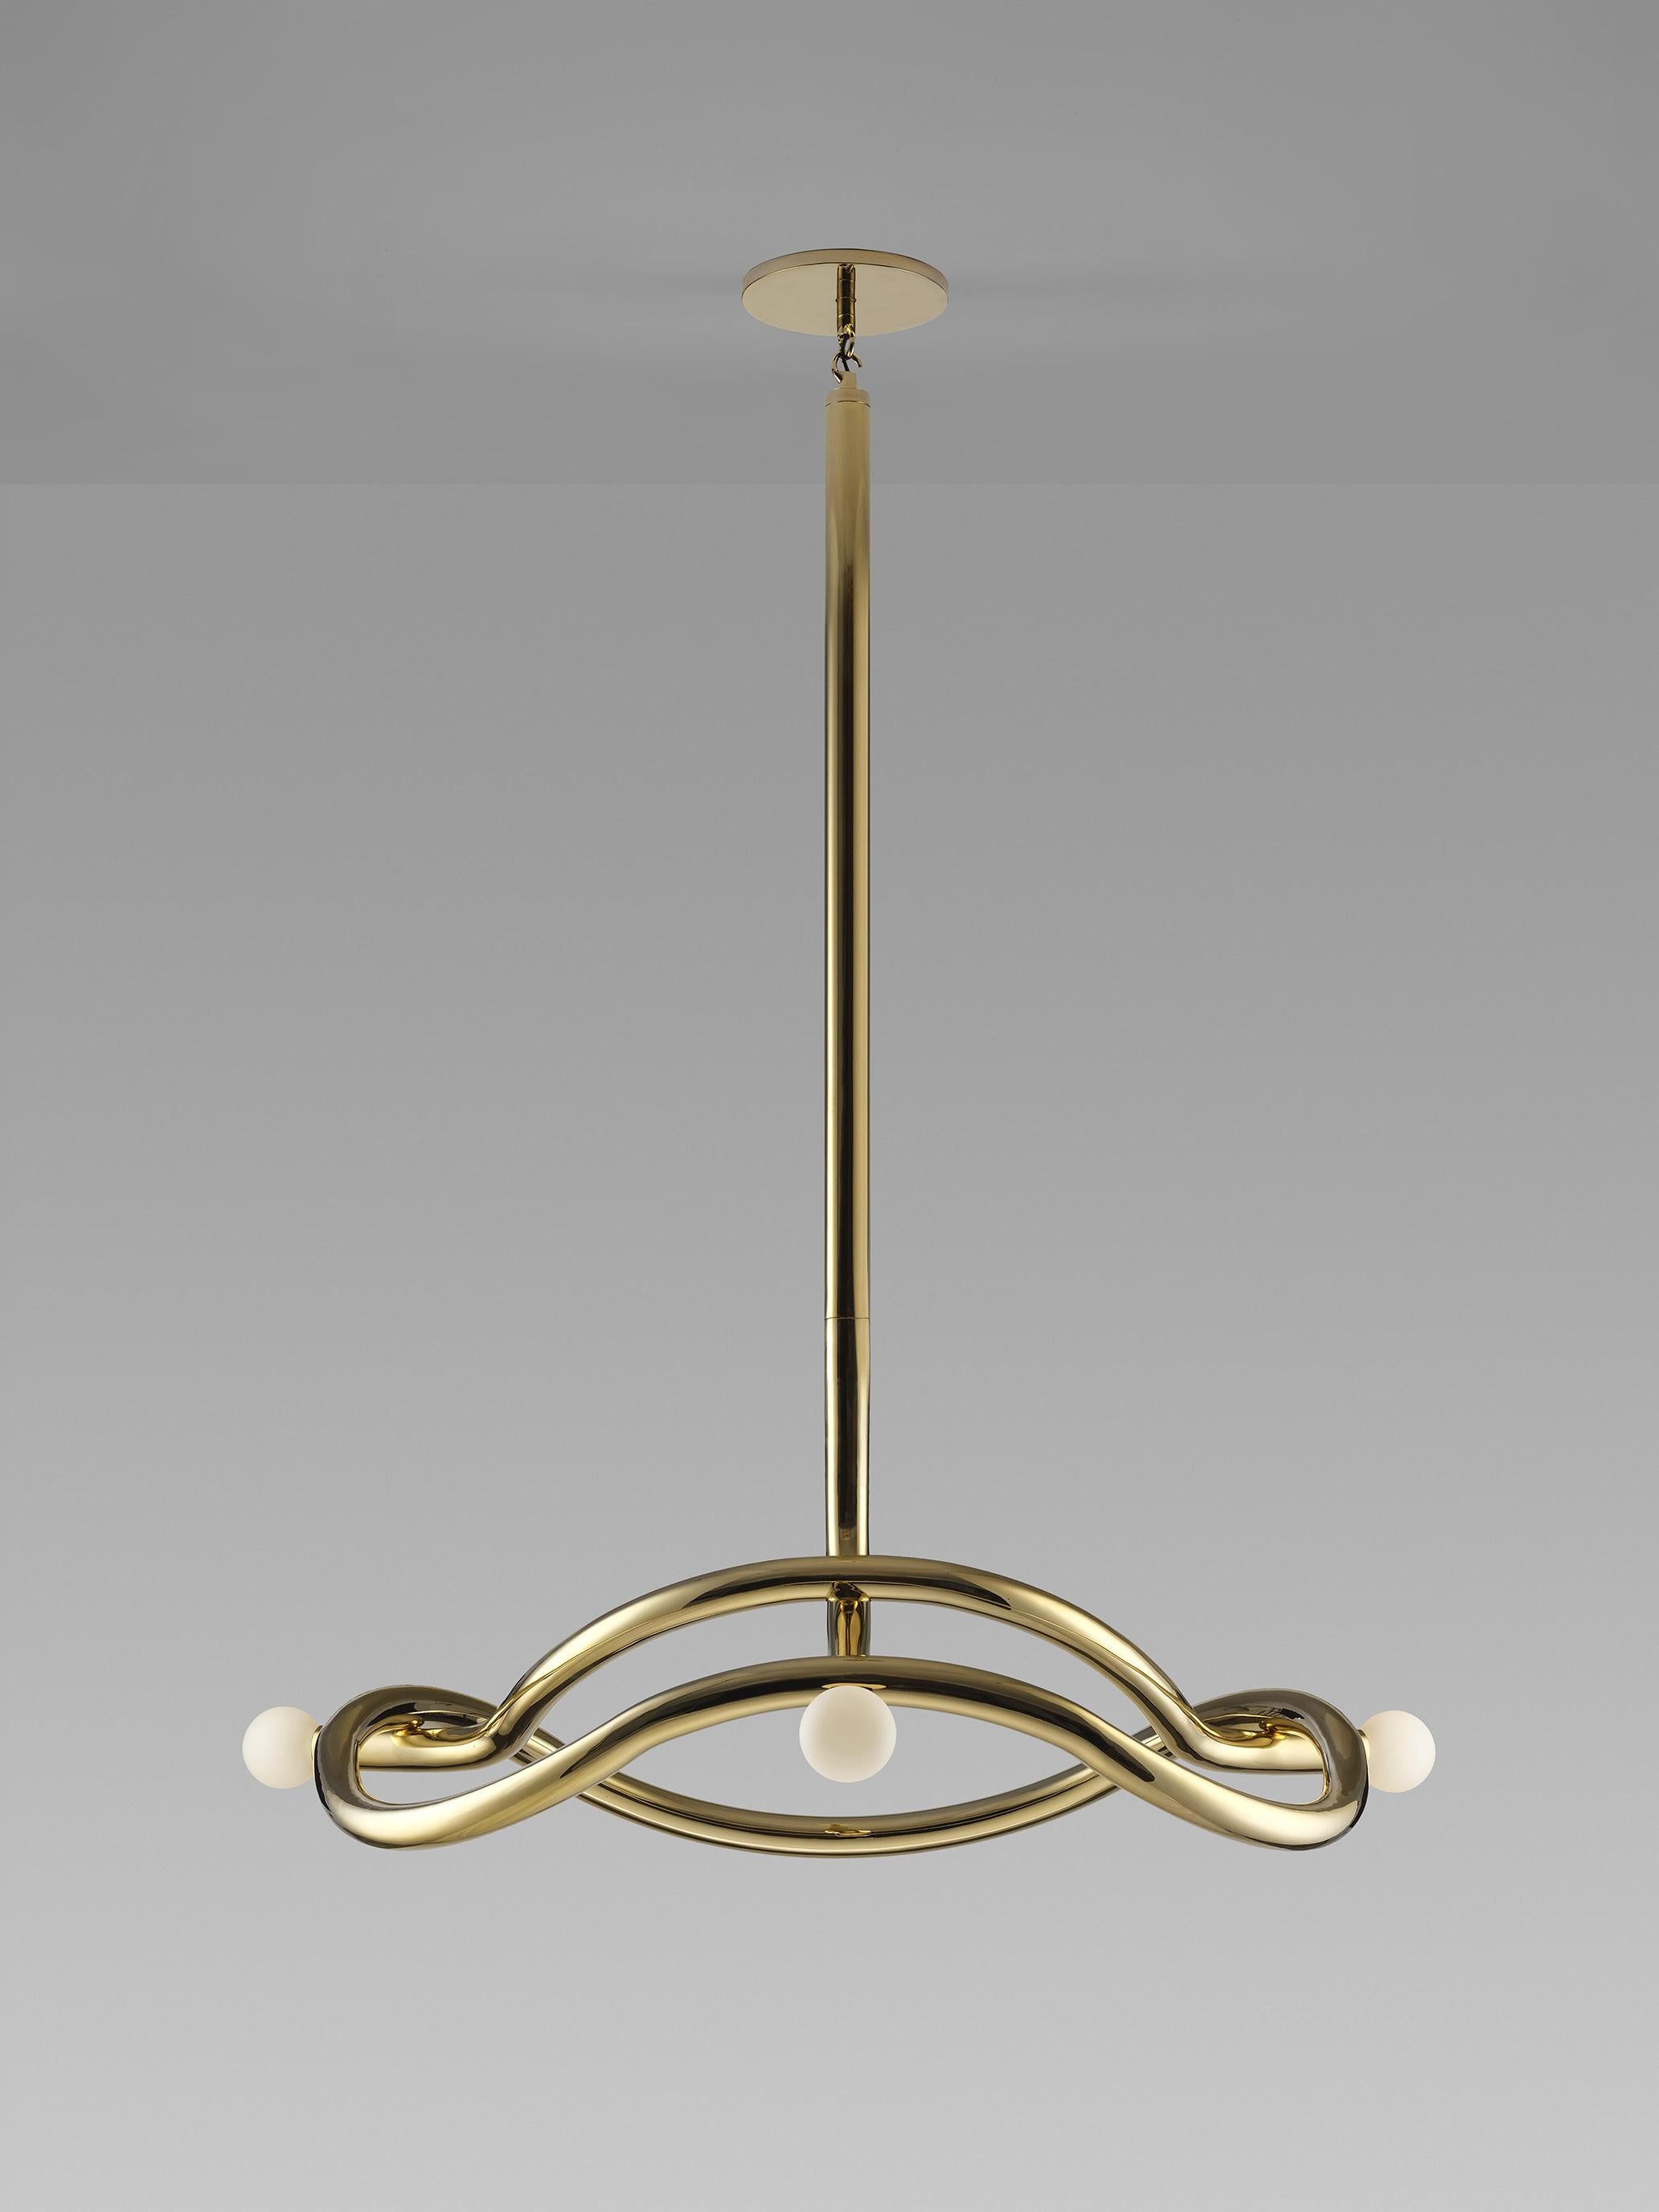 Tryst chandelier by Paul Matter
Materials: Brass and porcelain finish glass
Dimensions: W 114 x H 45.2 cm
Wight: 15 kg

Tryst chandelier explores the relationship between interlocked forms in perfect union and balance. A study of form and